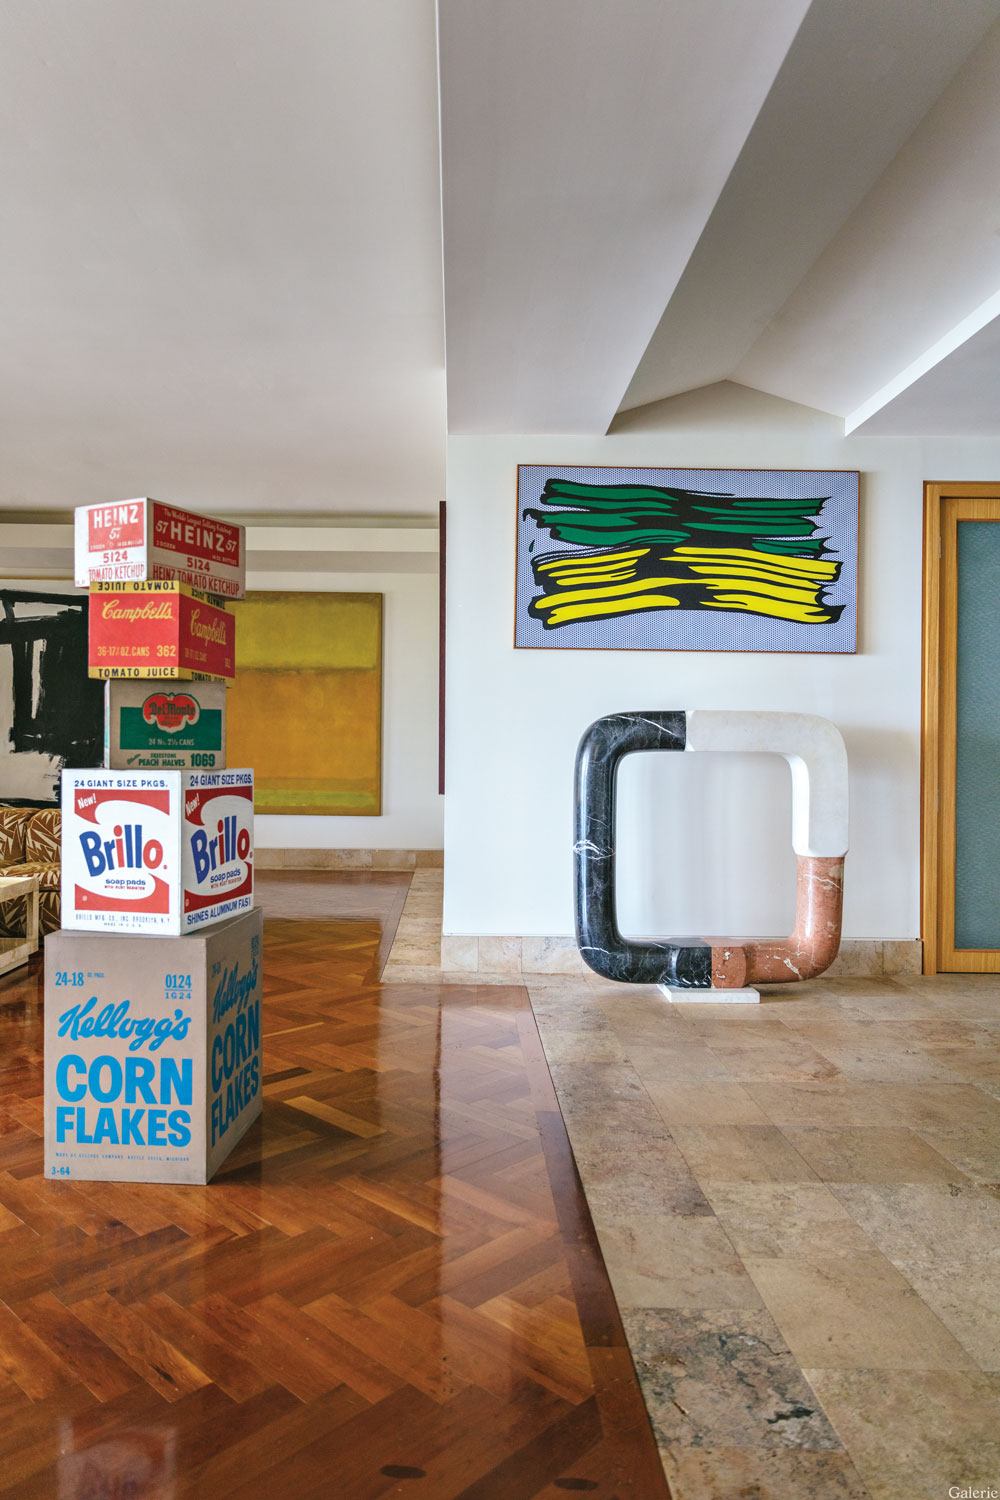 Works by Andy Warhol, Roy Lichtenstein, and Isamu Noguchi animate the Miami home of collector Martin Margulies.